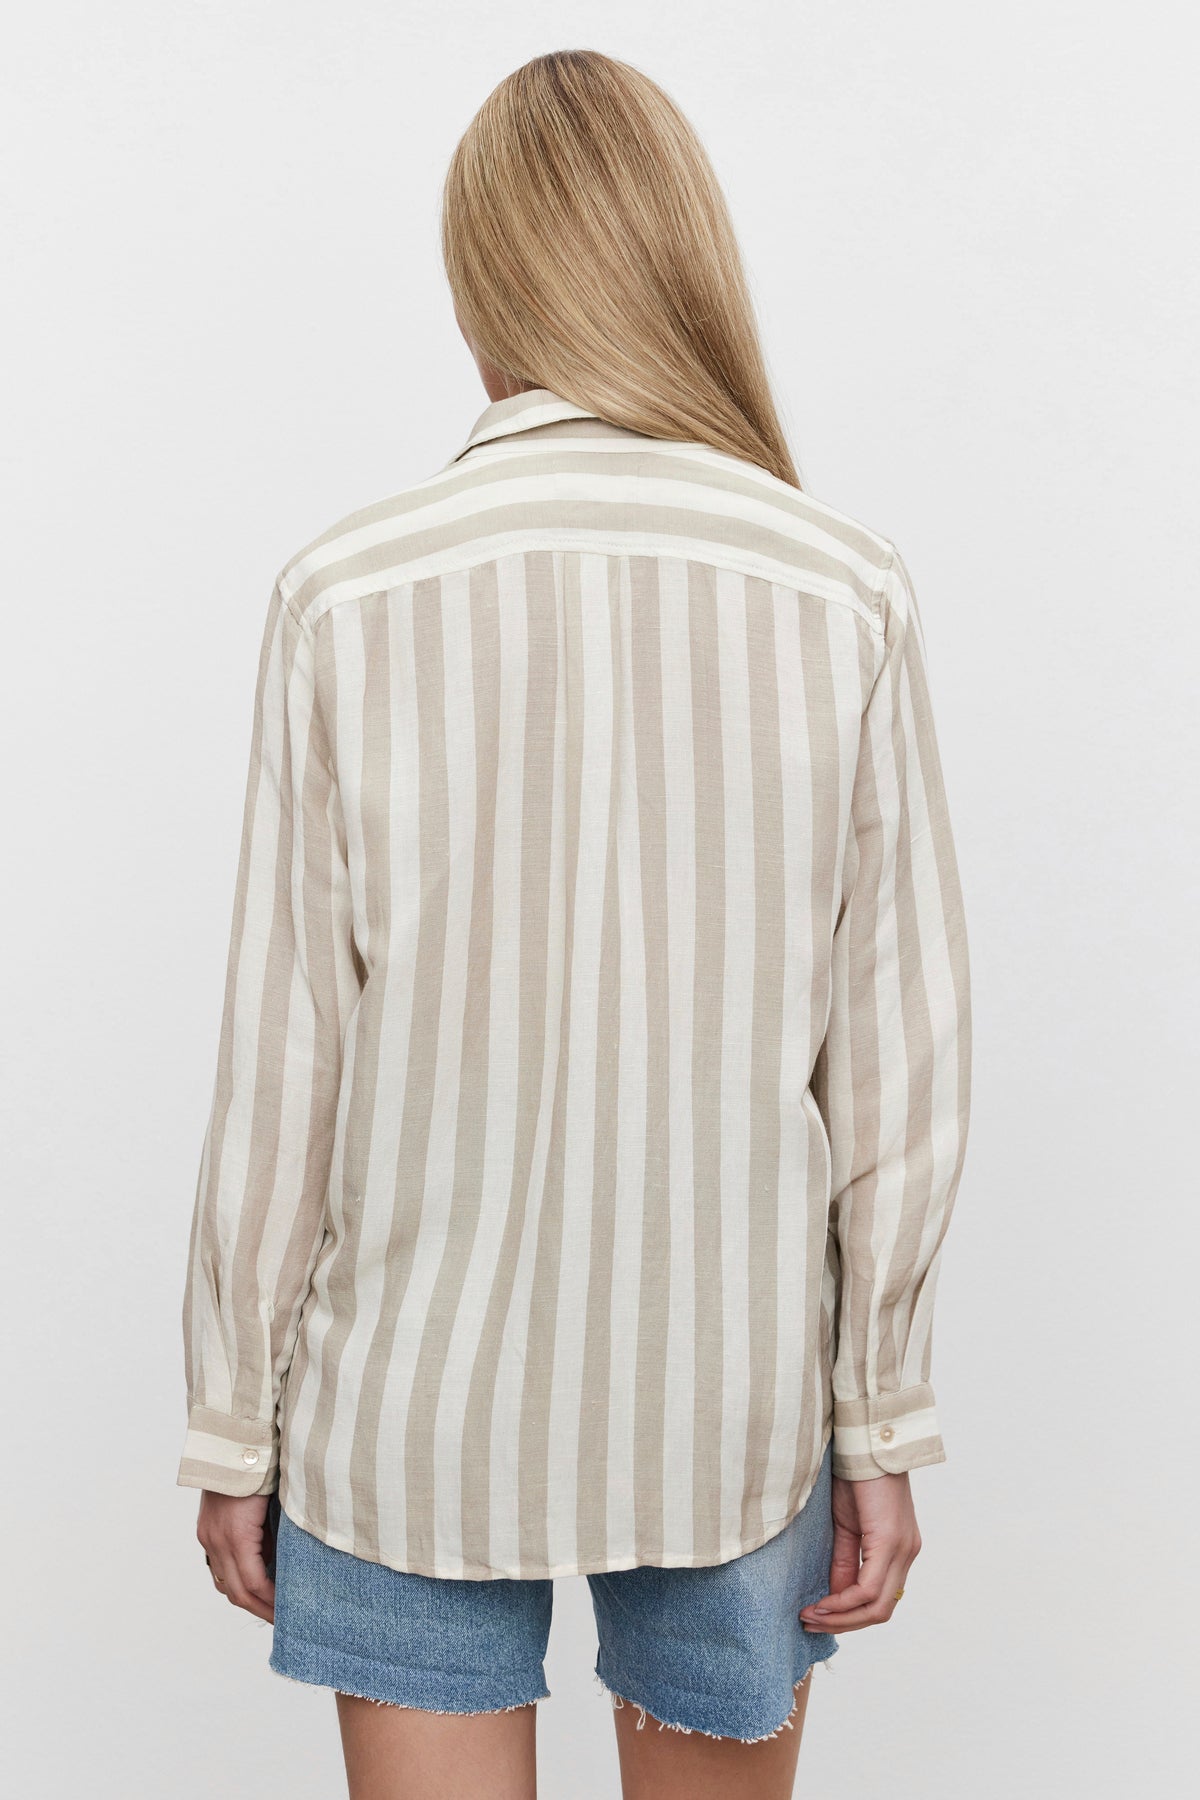   A woman wearing a Velvet by Graham & Spencer HARLOW STRIPED LINEN BUTTON-UP SHIRT in a relaxed fit, shown from the back. 